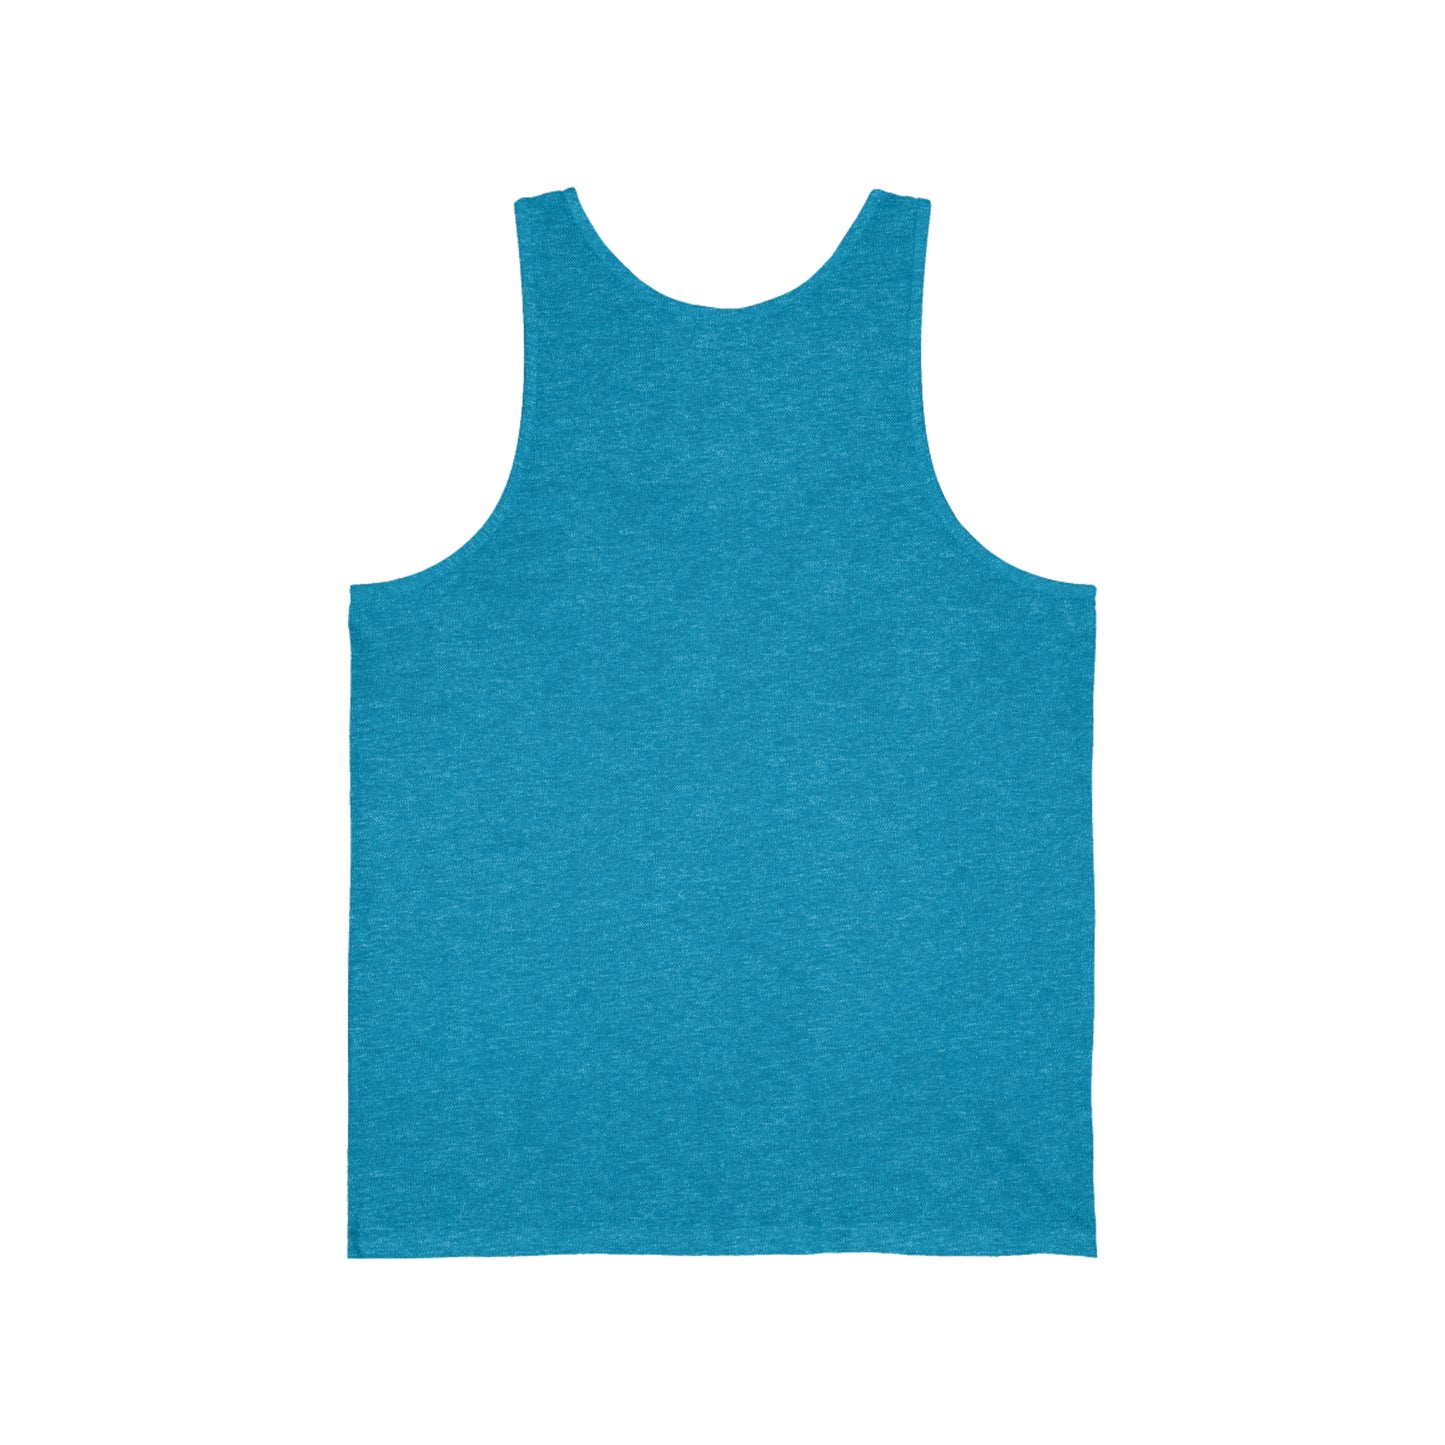 A Printify Unisex Jersey Tank in plain blue on a white background, purchased in Cabbagetown, Toronto.